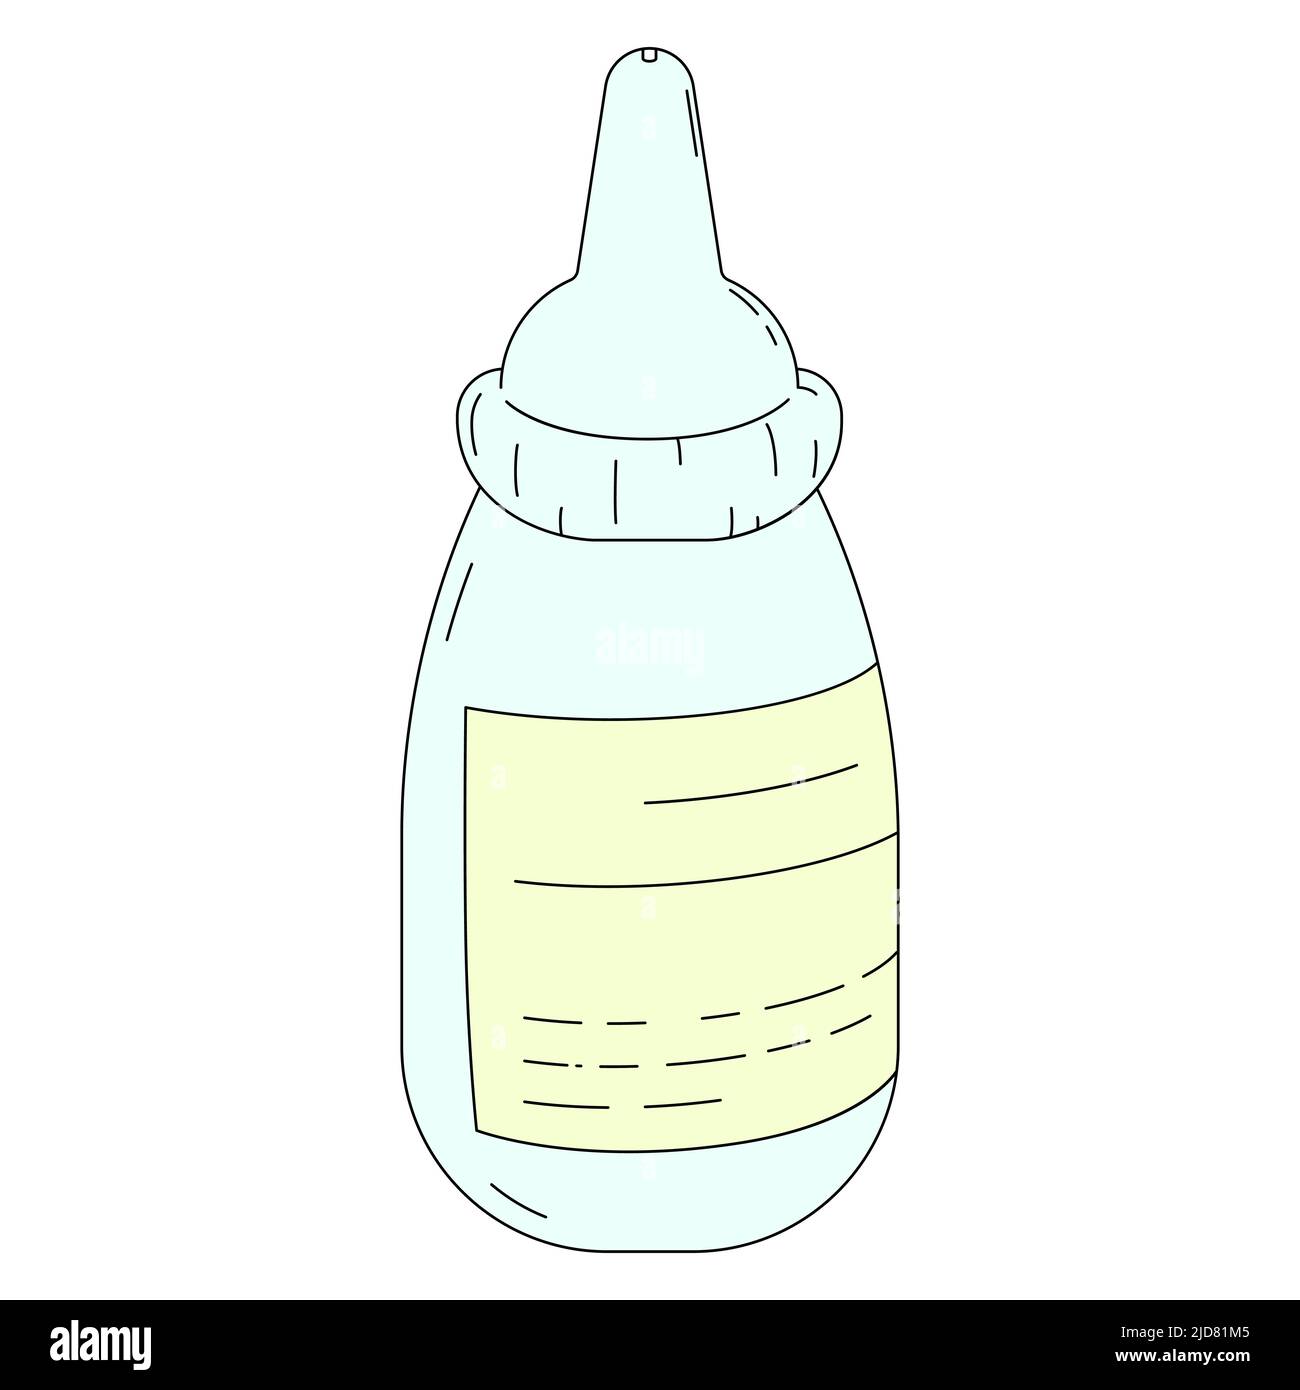 Nasal drops or medicine for ear infection. Medicine in cartoon style isolated on a white background Stock Vector